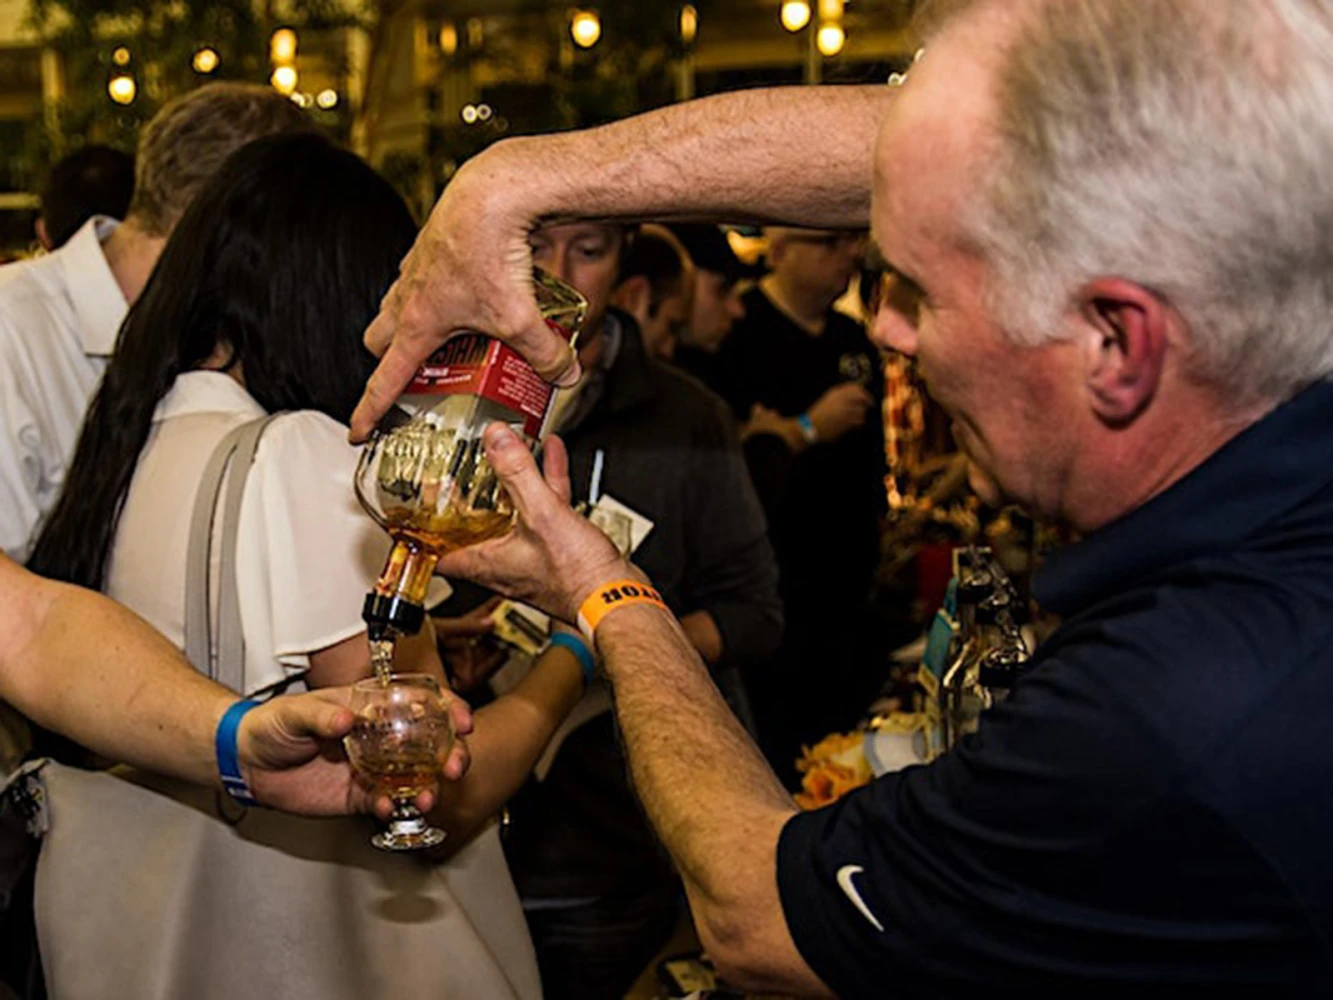 Jersey City Whiskey Fest: What to expect - 4